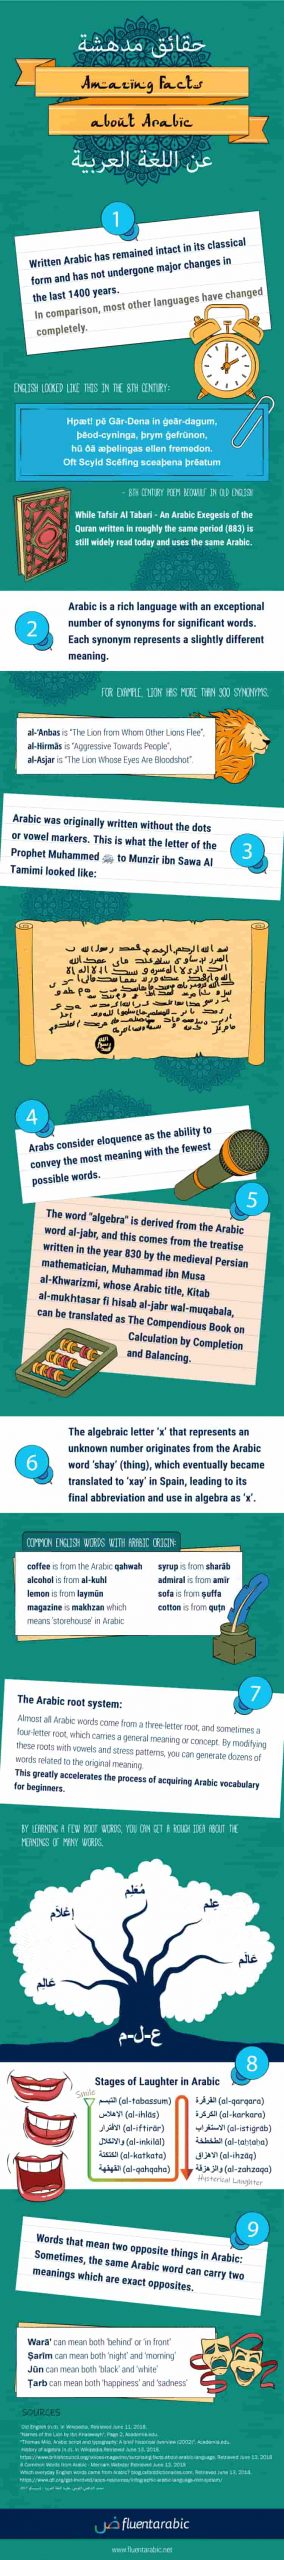 Amazing facts about the Arabic language infographic